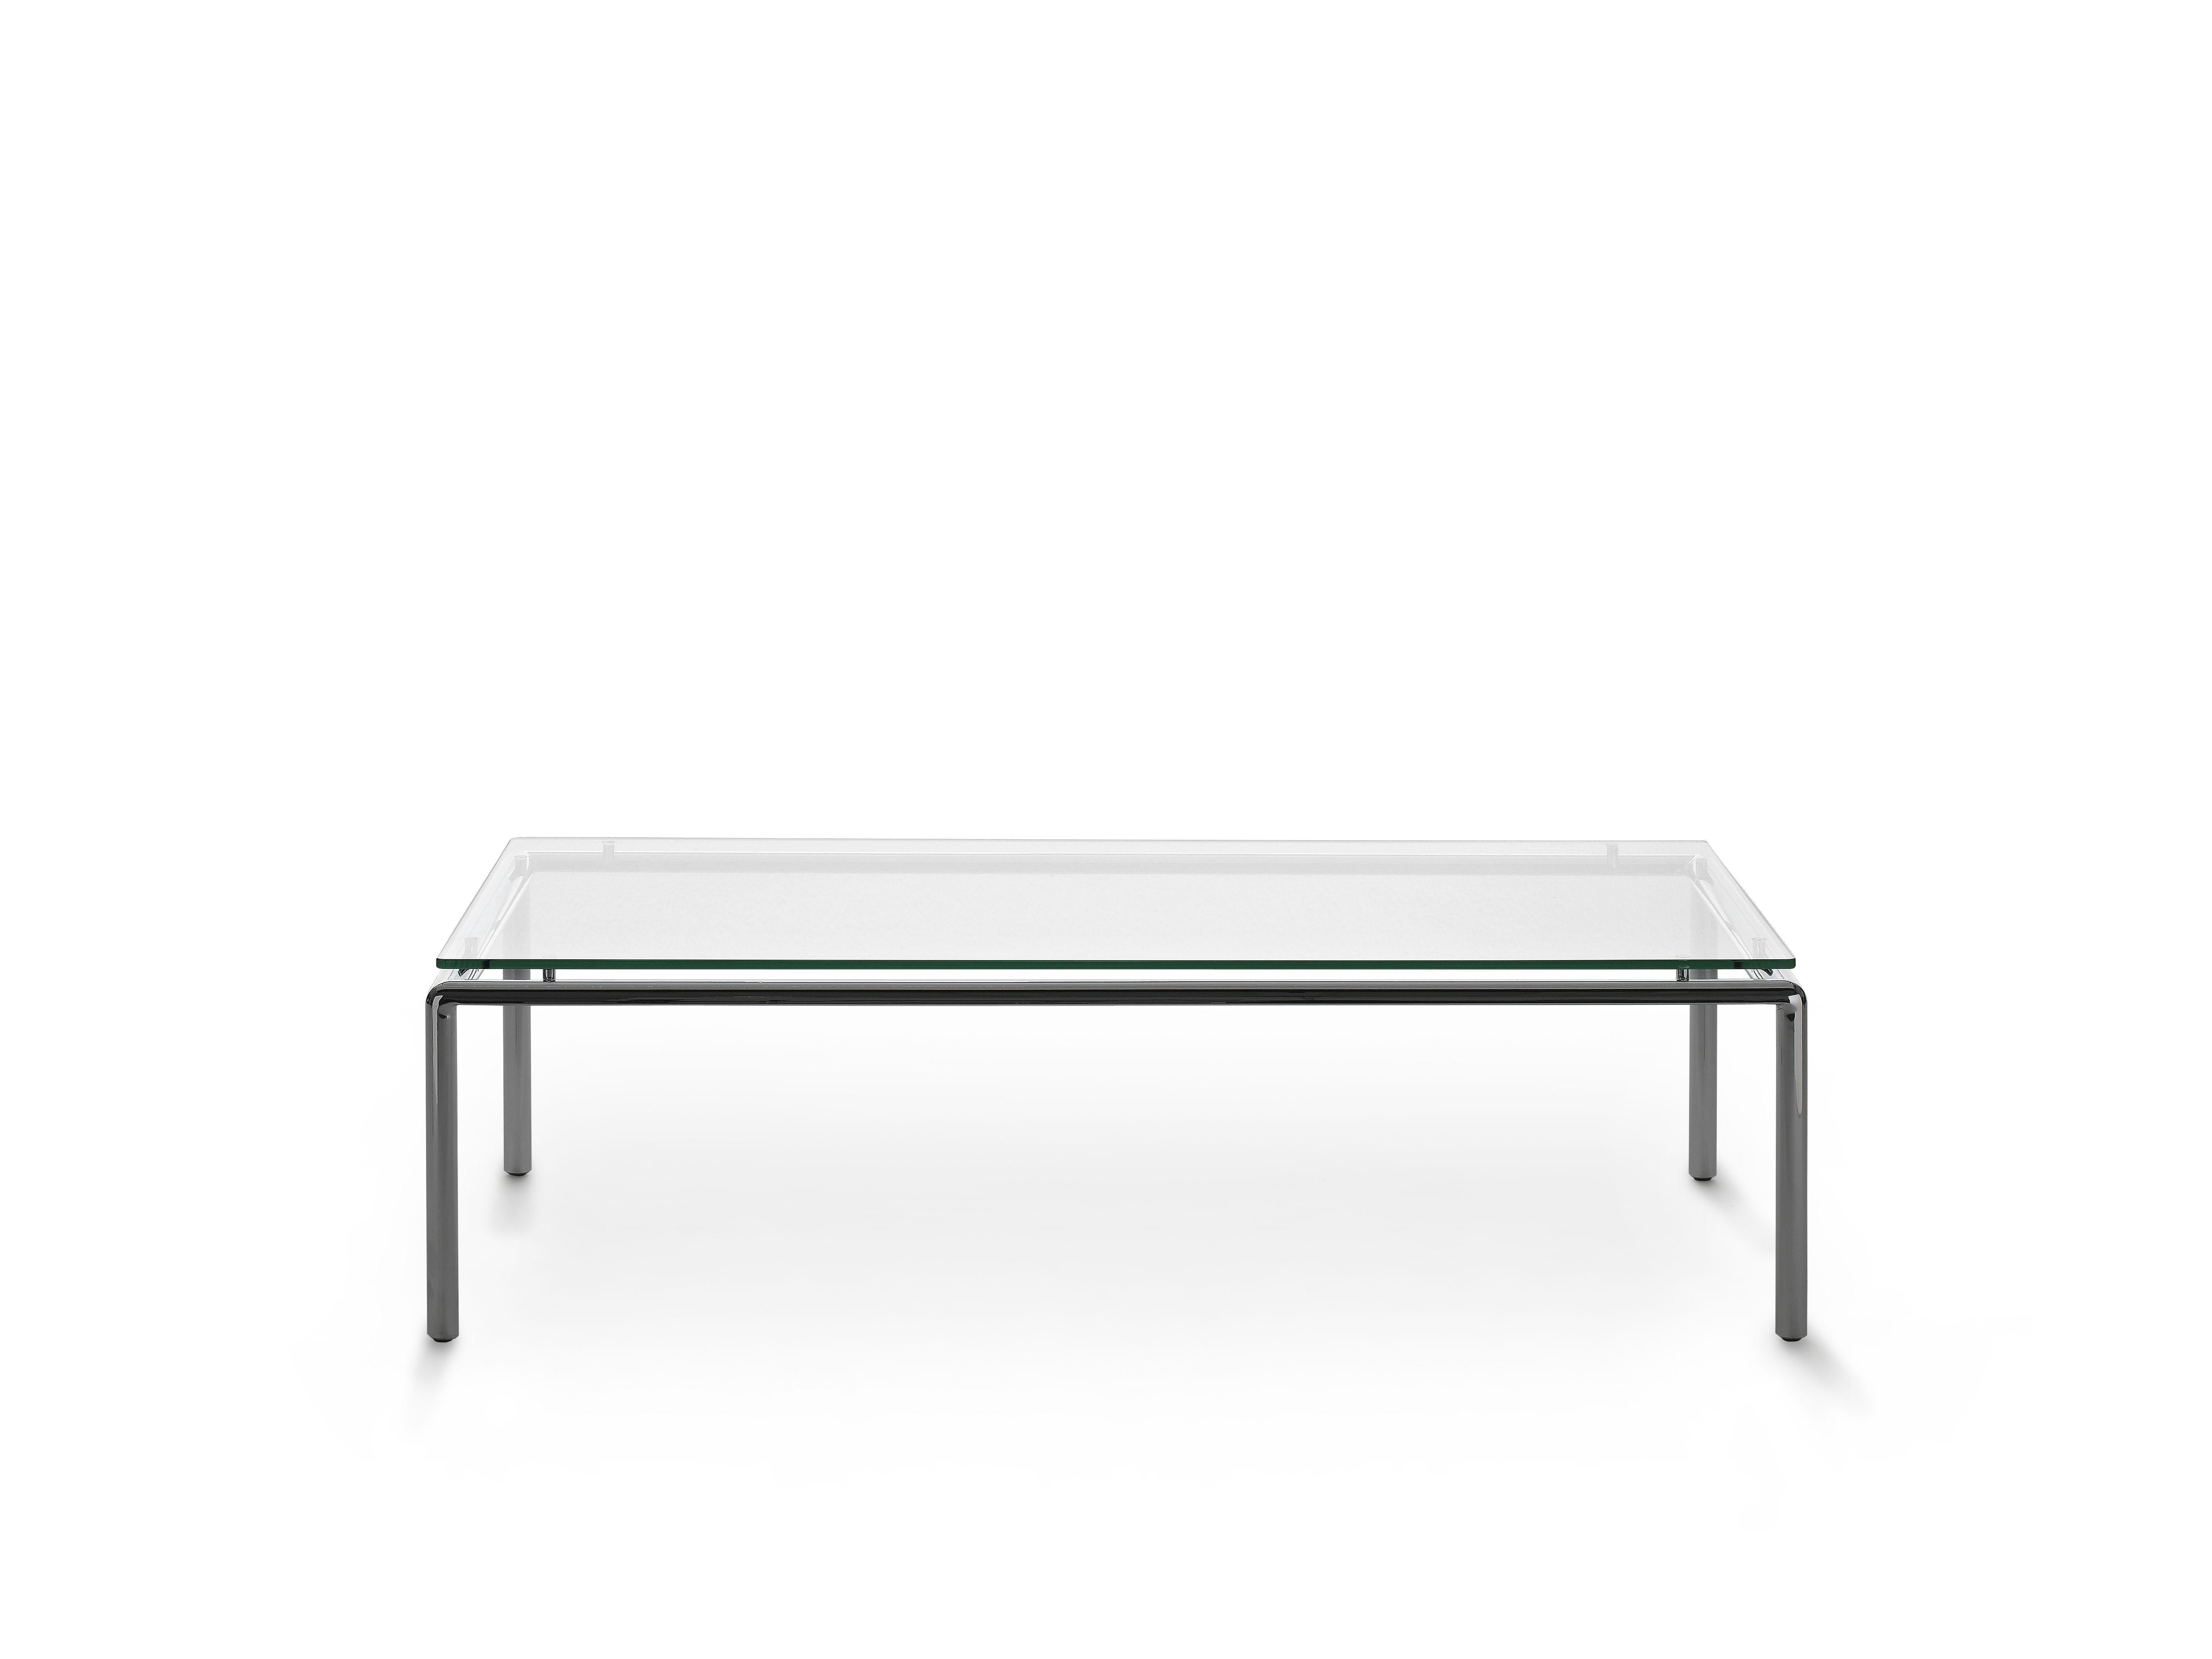 DS-9075 table by De Sede
Dimensions: D 65 x W 130 x H 38 cm
Materials: Round tubular frame in high-gloss chrome-plated steel, 10 mm Sekurit Floatglass

Prices may change according to the chosen materials and size. 

Exclusive living